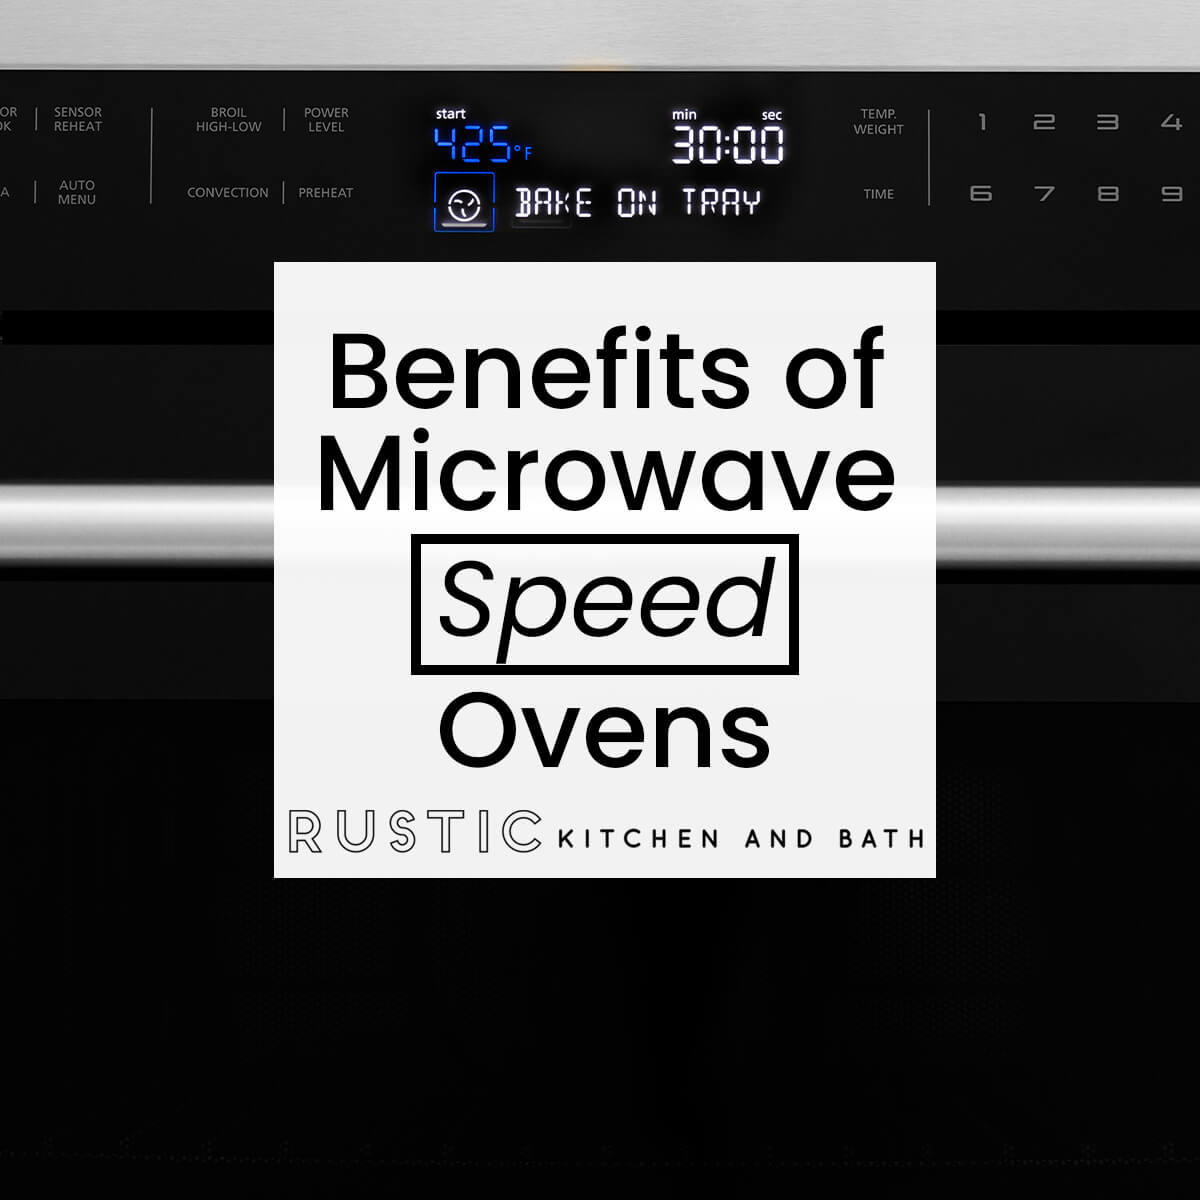 Benefits of Microwave Speed Ovens